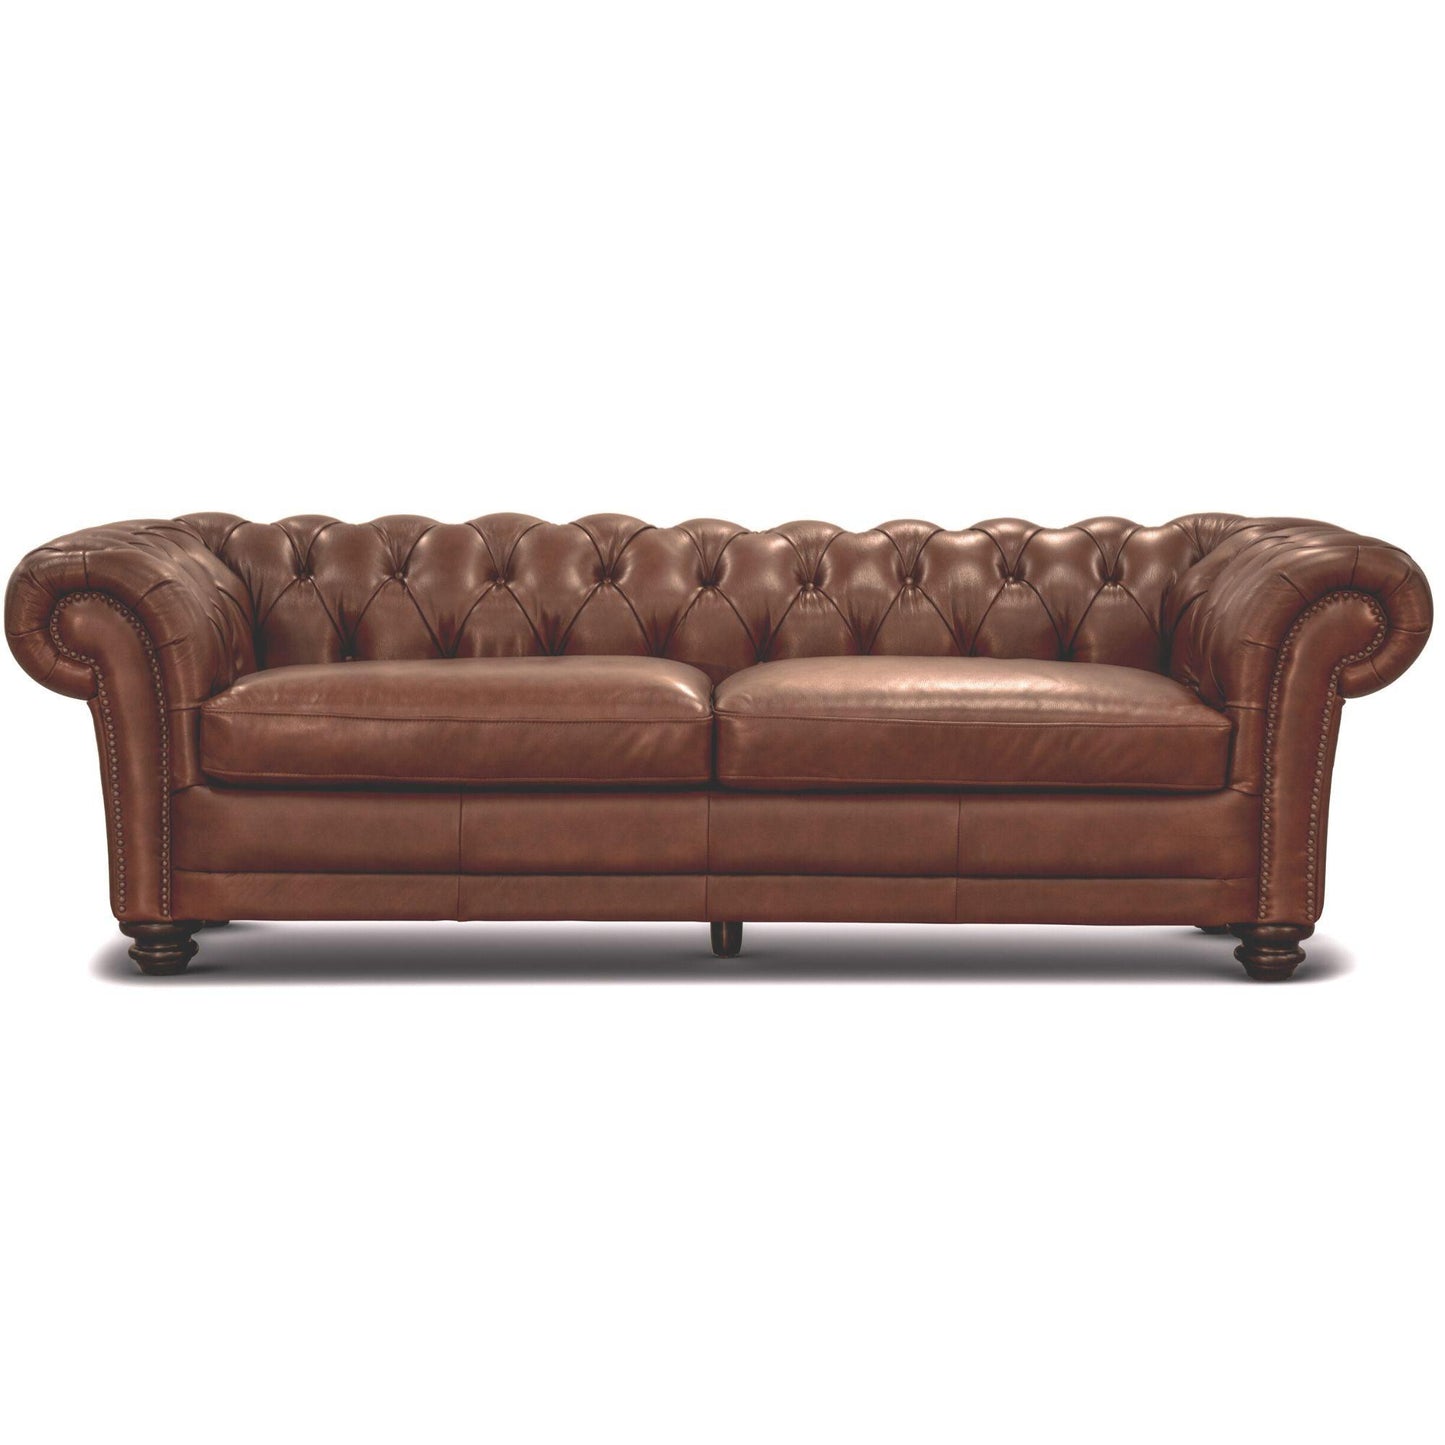 Sonny 3+2.5+1 Seater Genuine Leather Sofa Chestfield Lounge Couch - Butterscotch